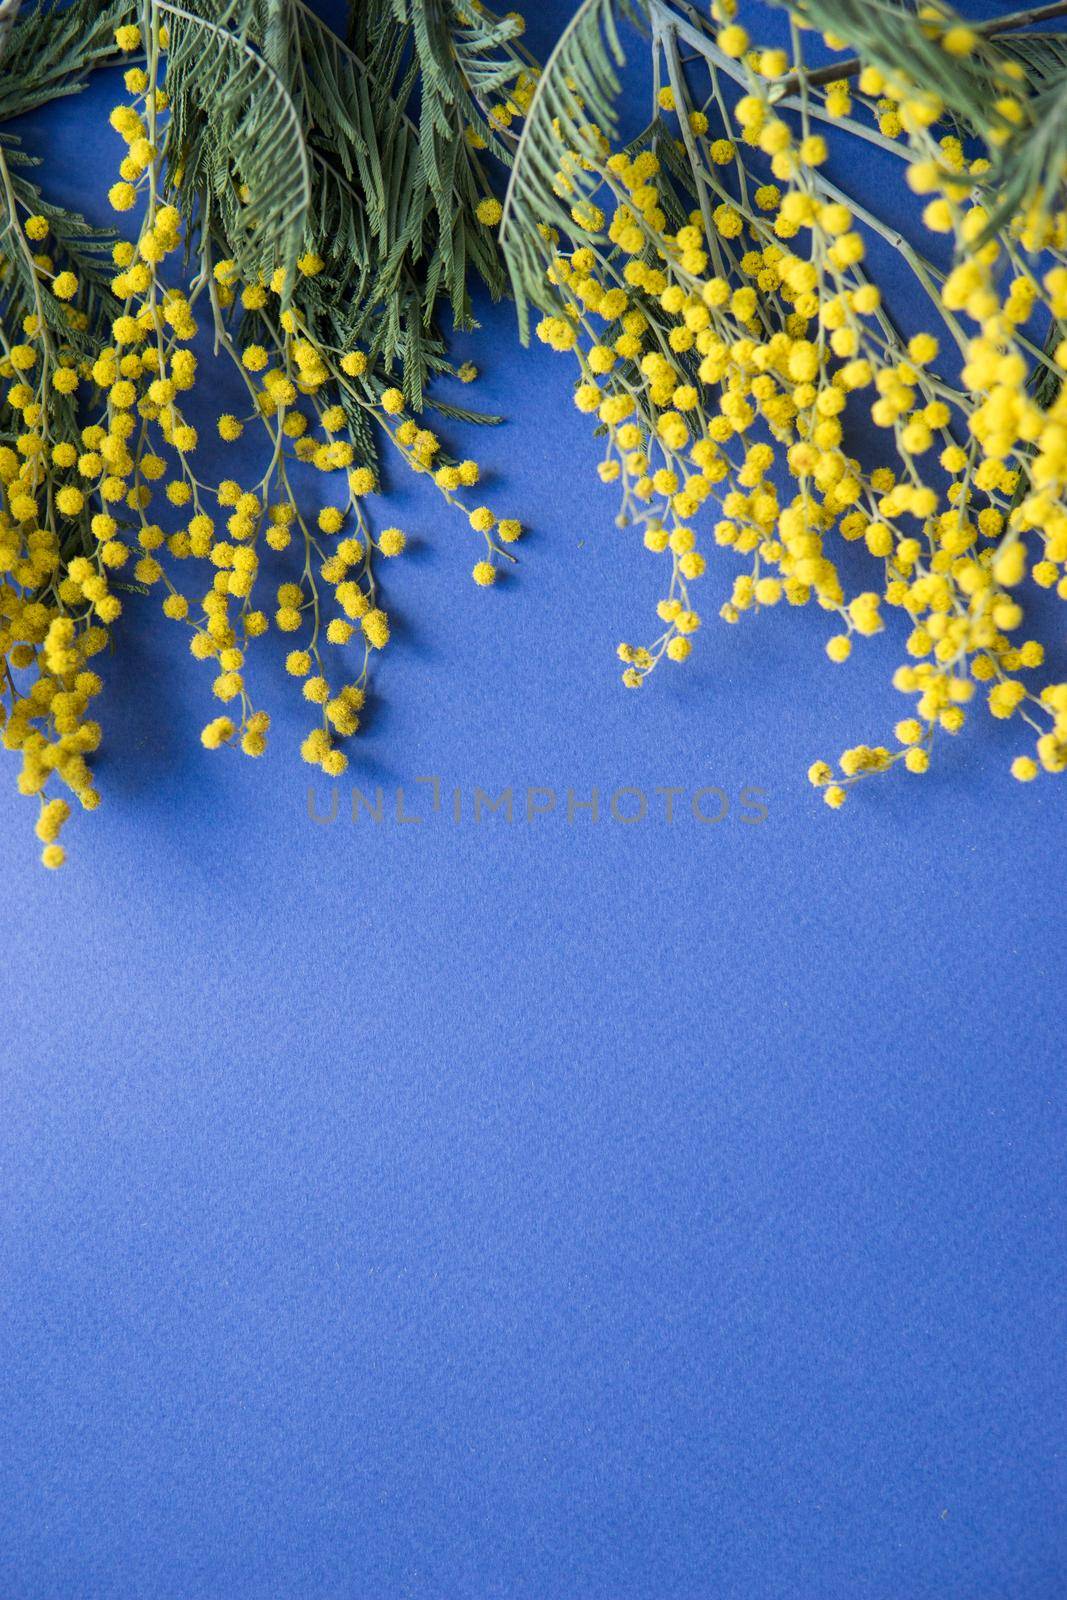 Spring concert. Mimosa on a blue background. Mimosa close-up. Happy spring. Space for text.